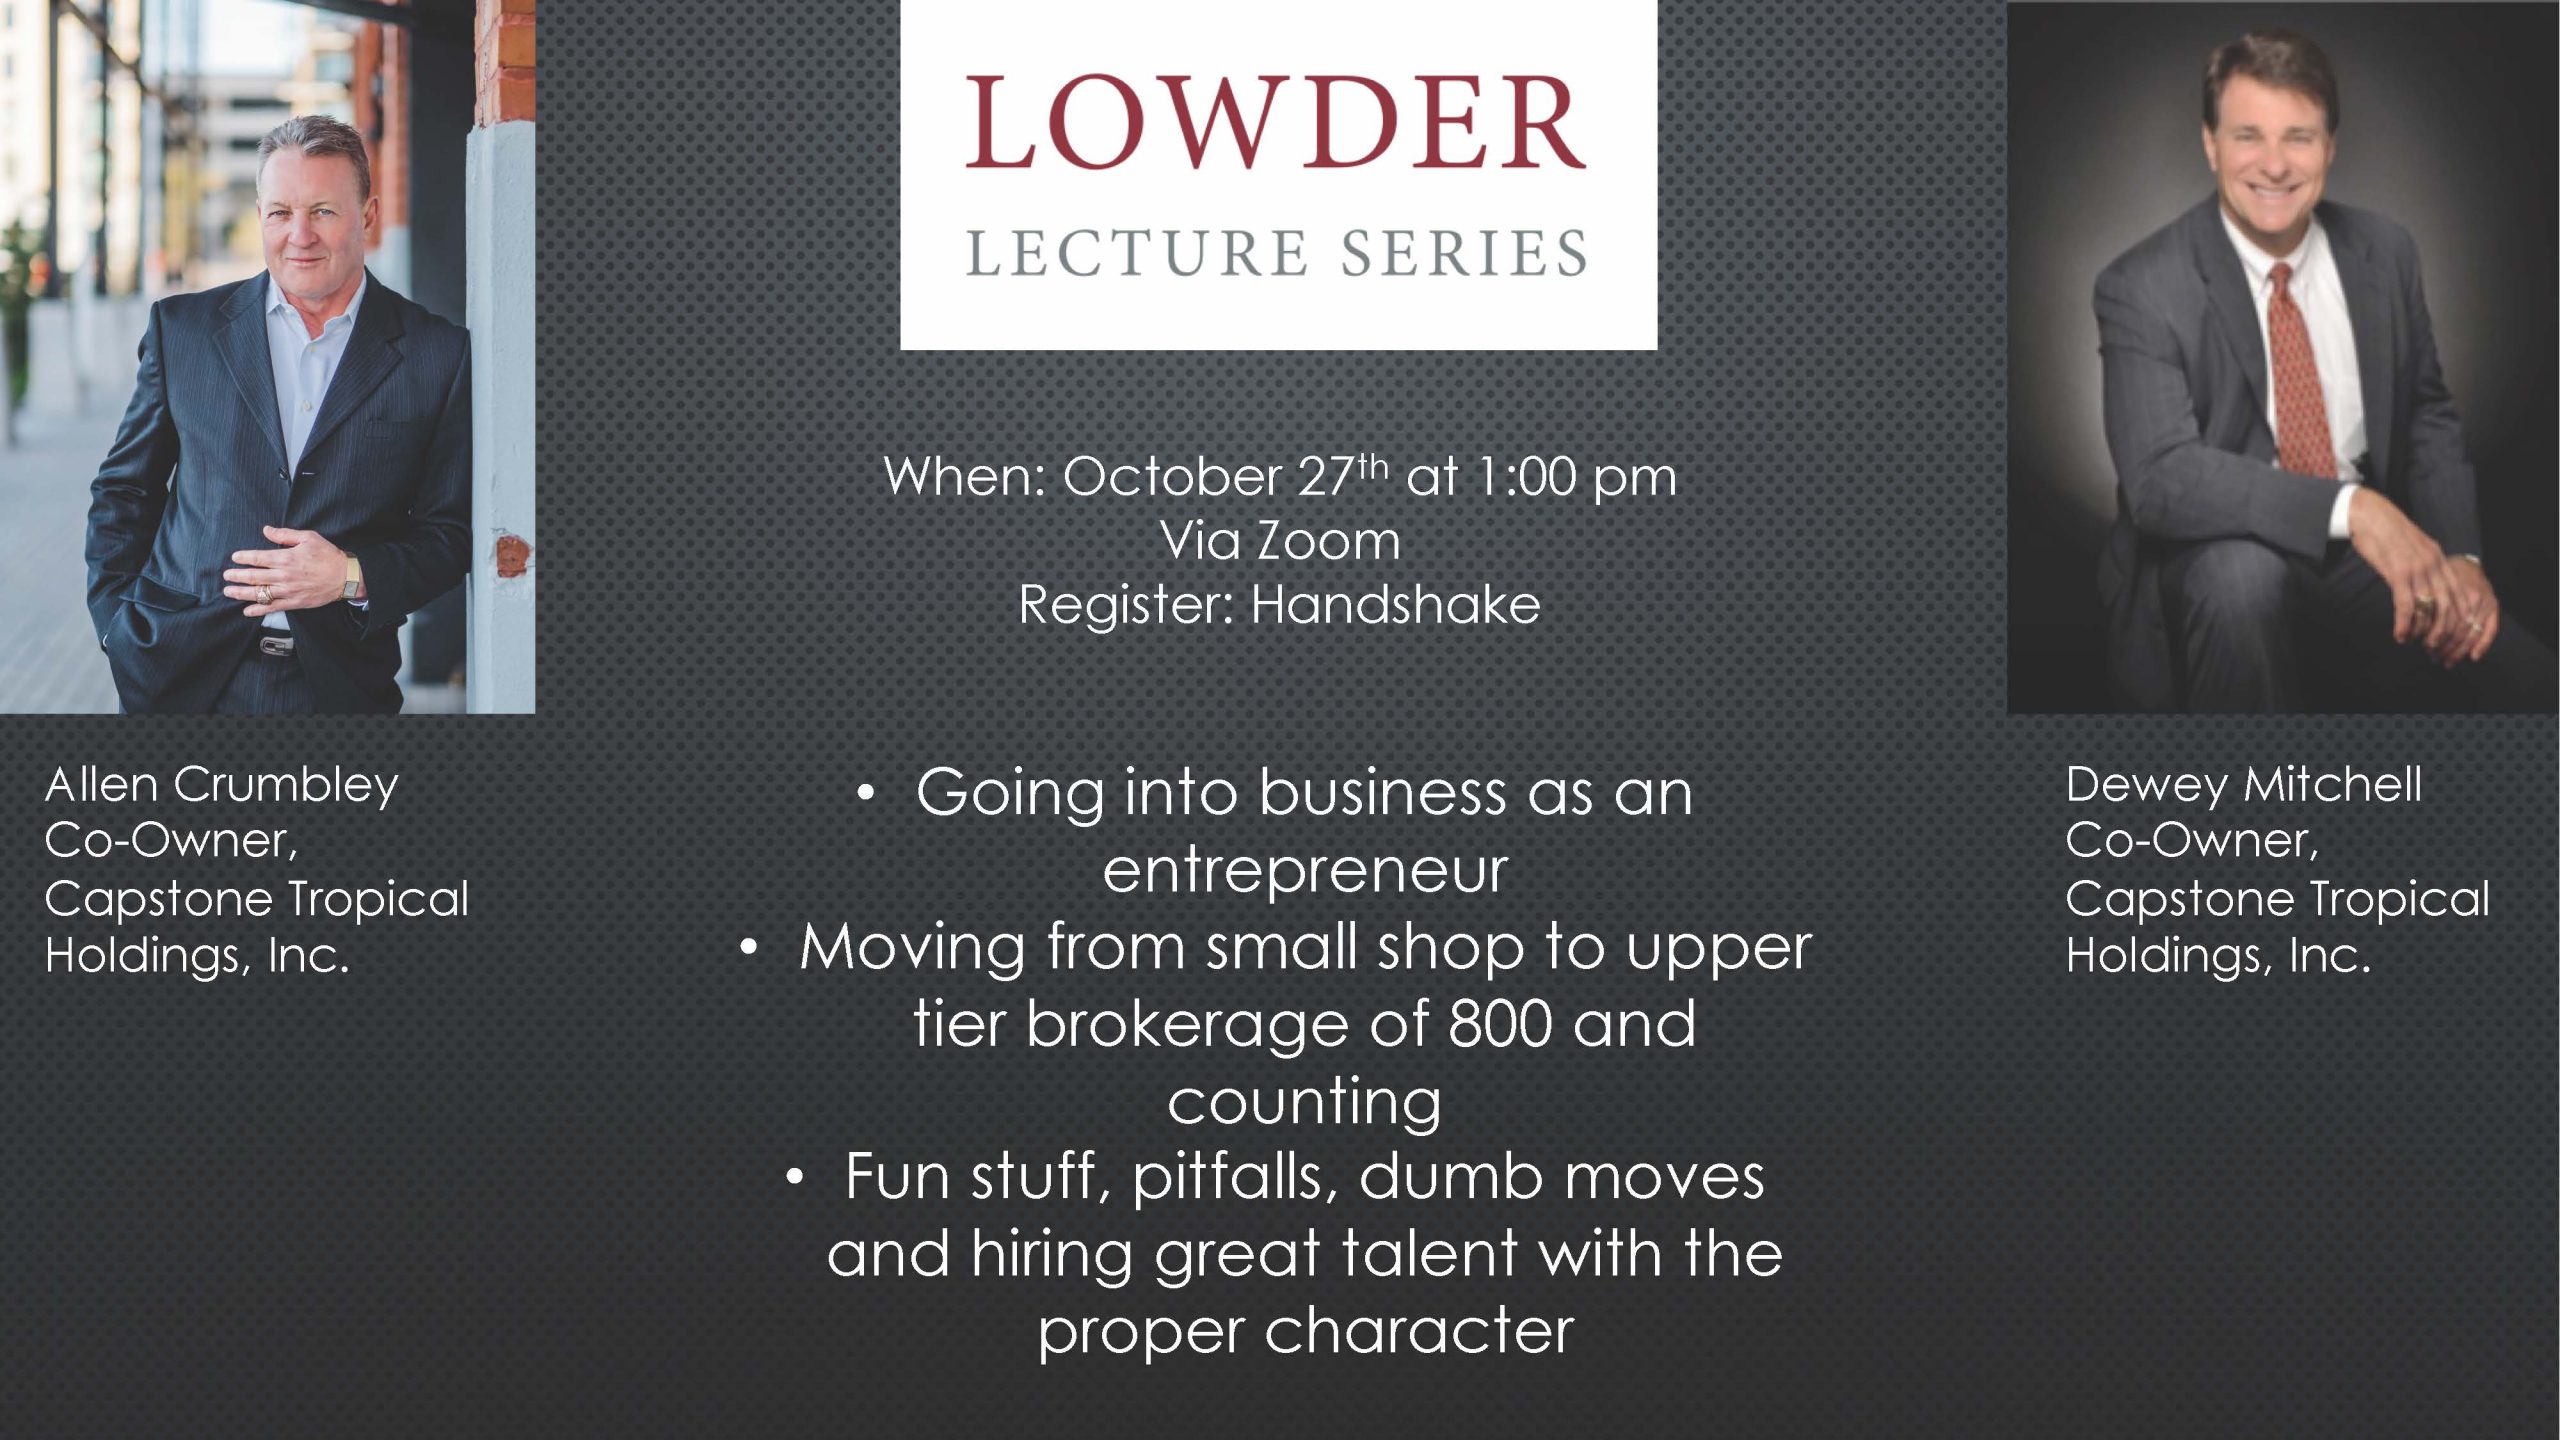 Crumbley and Mitchell Lowder Lecture Series